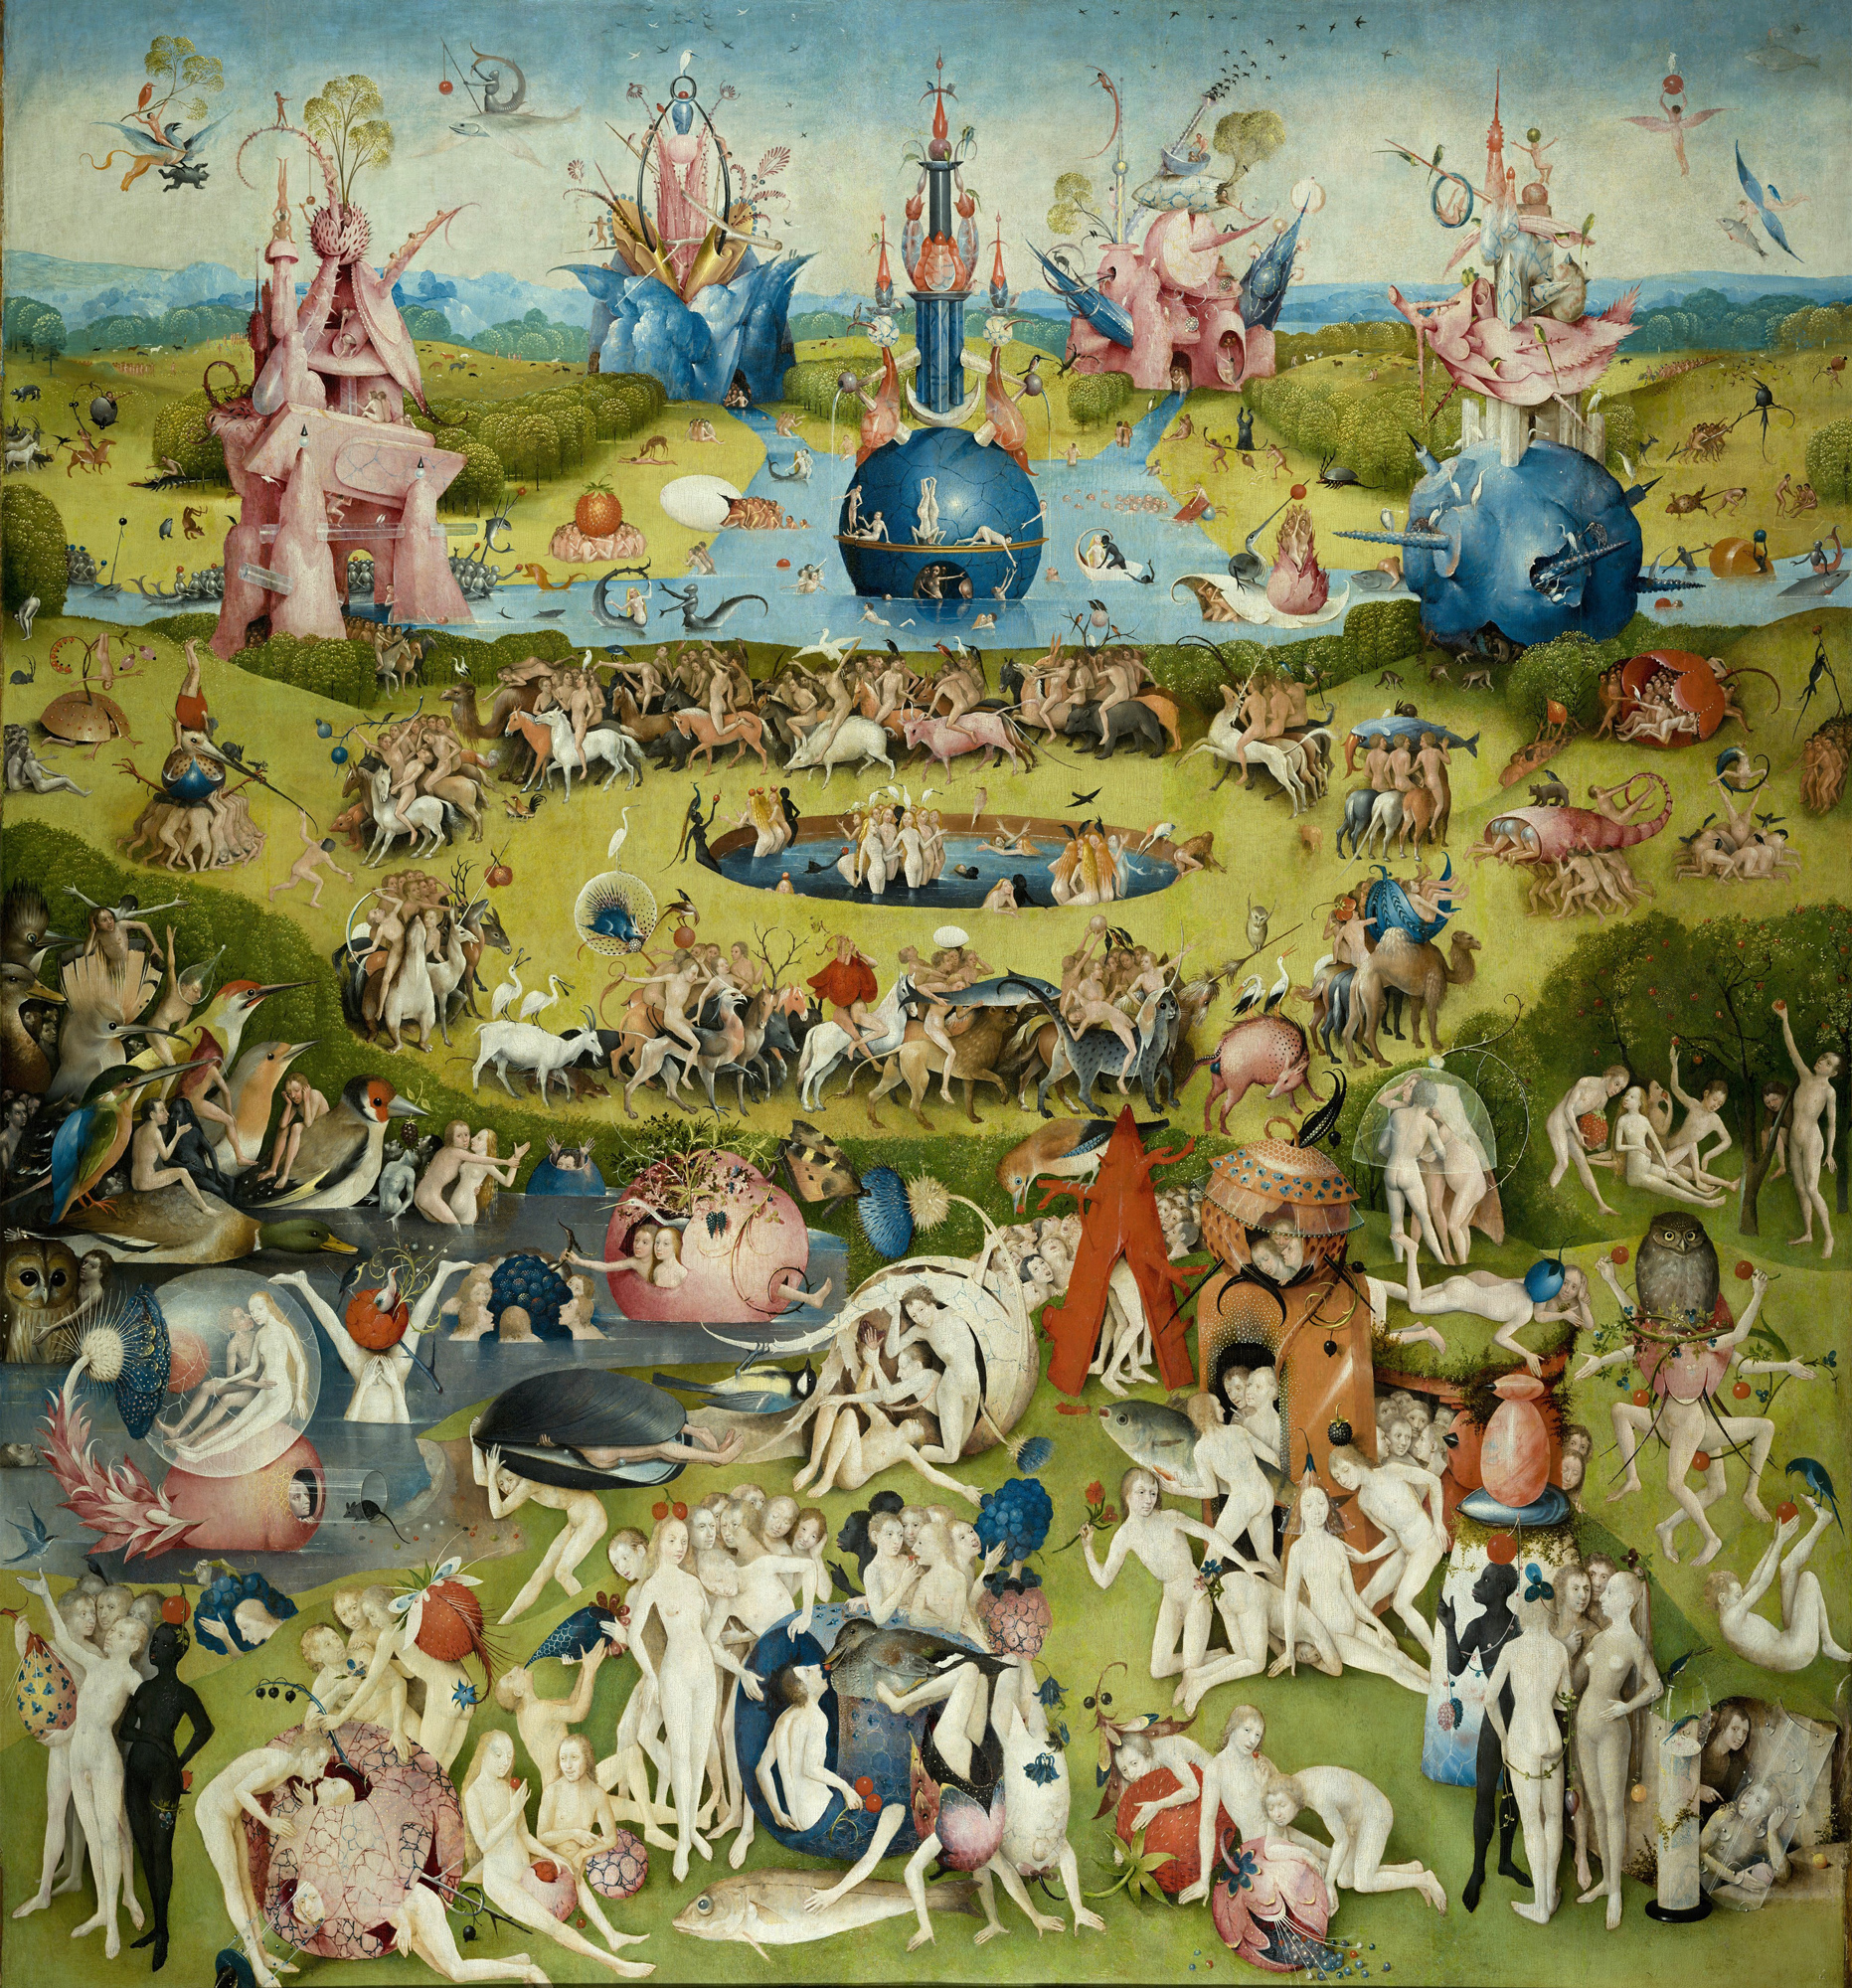 Hieronymus Bosch, Center Panel - The Garden of Earthly Delights, 1503-1515